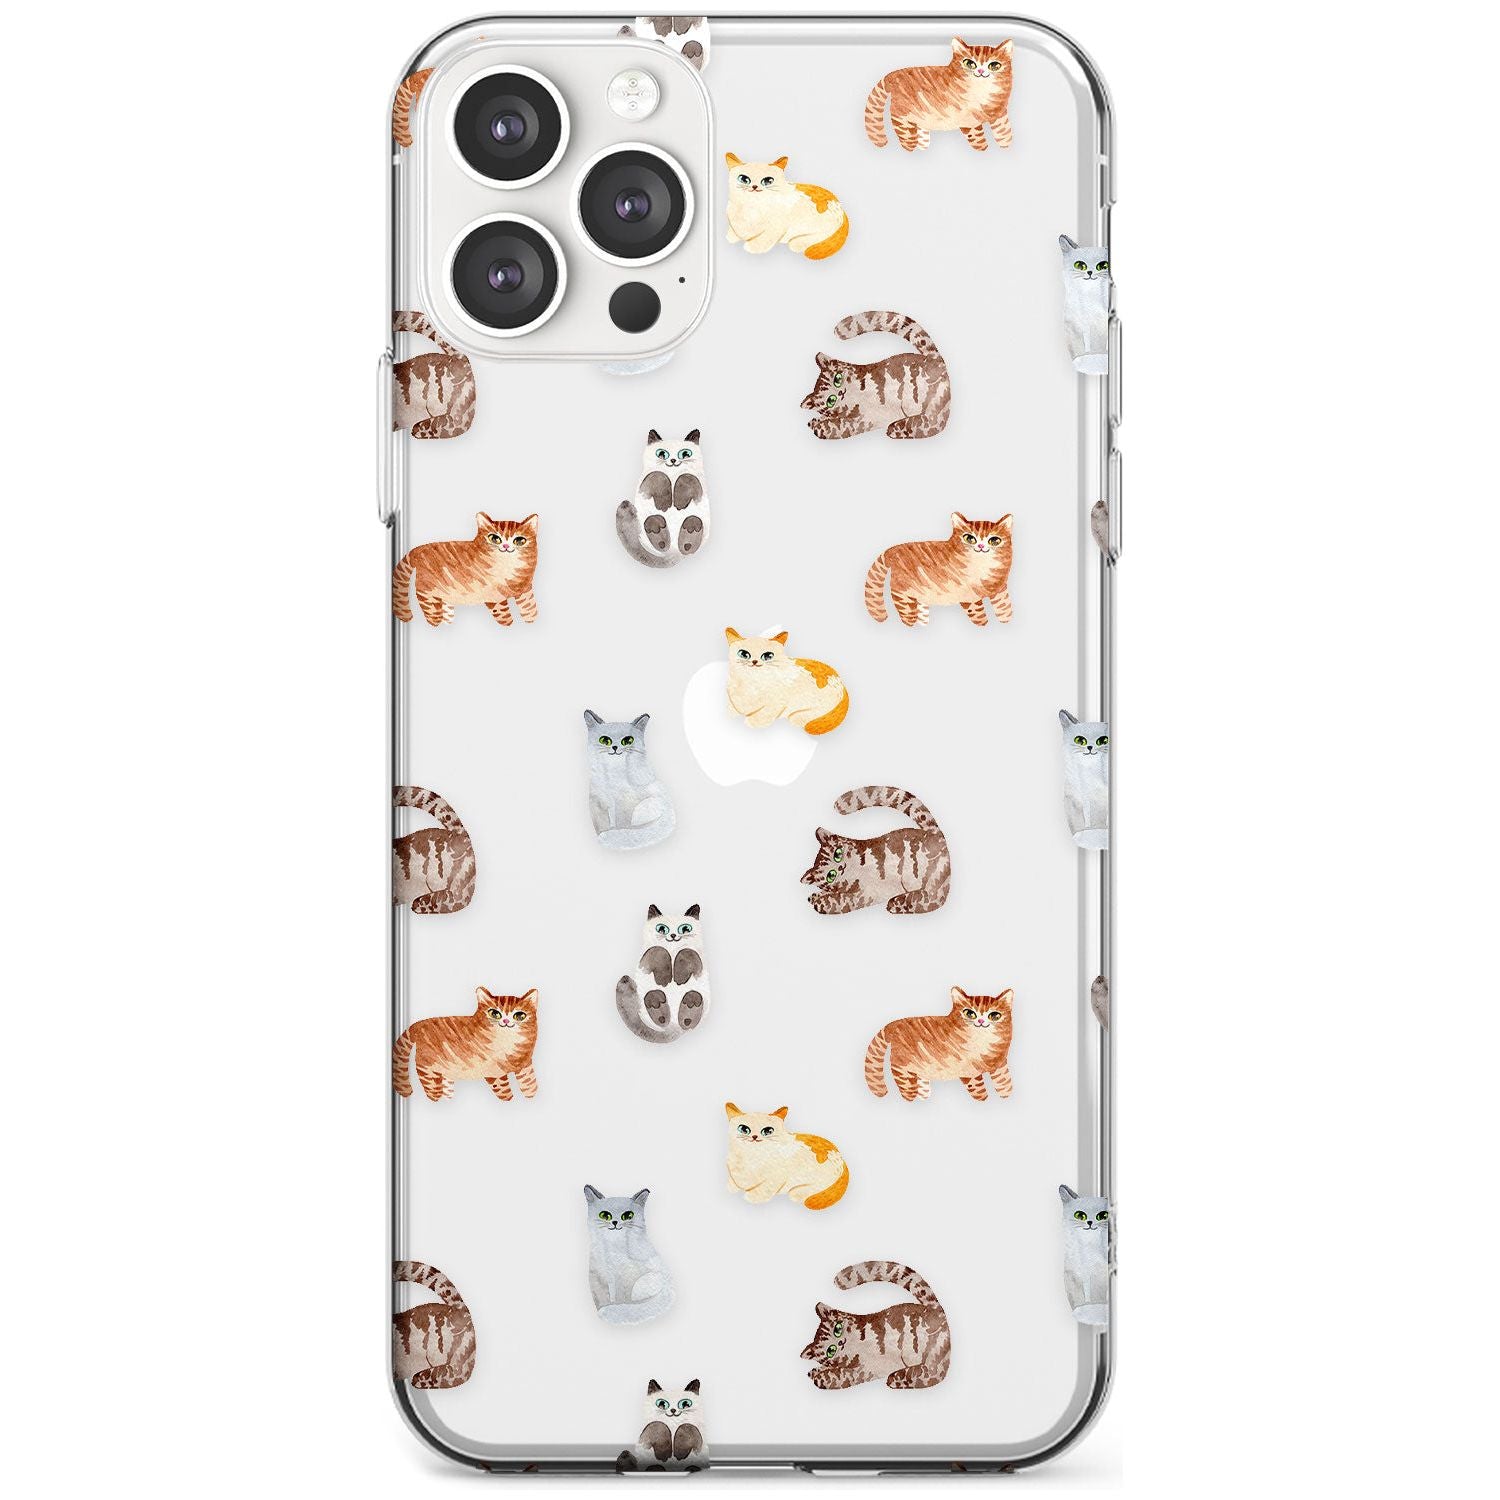 Cute Cat Pattern - Clear Black Impact Phone Case for iPhone 11 Pro Max